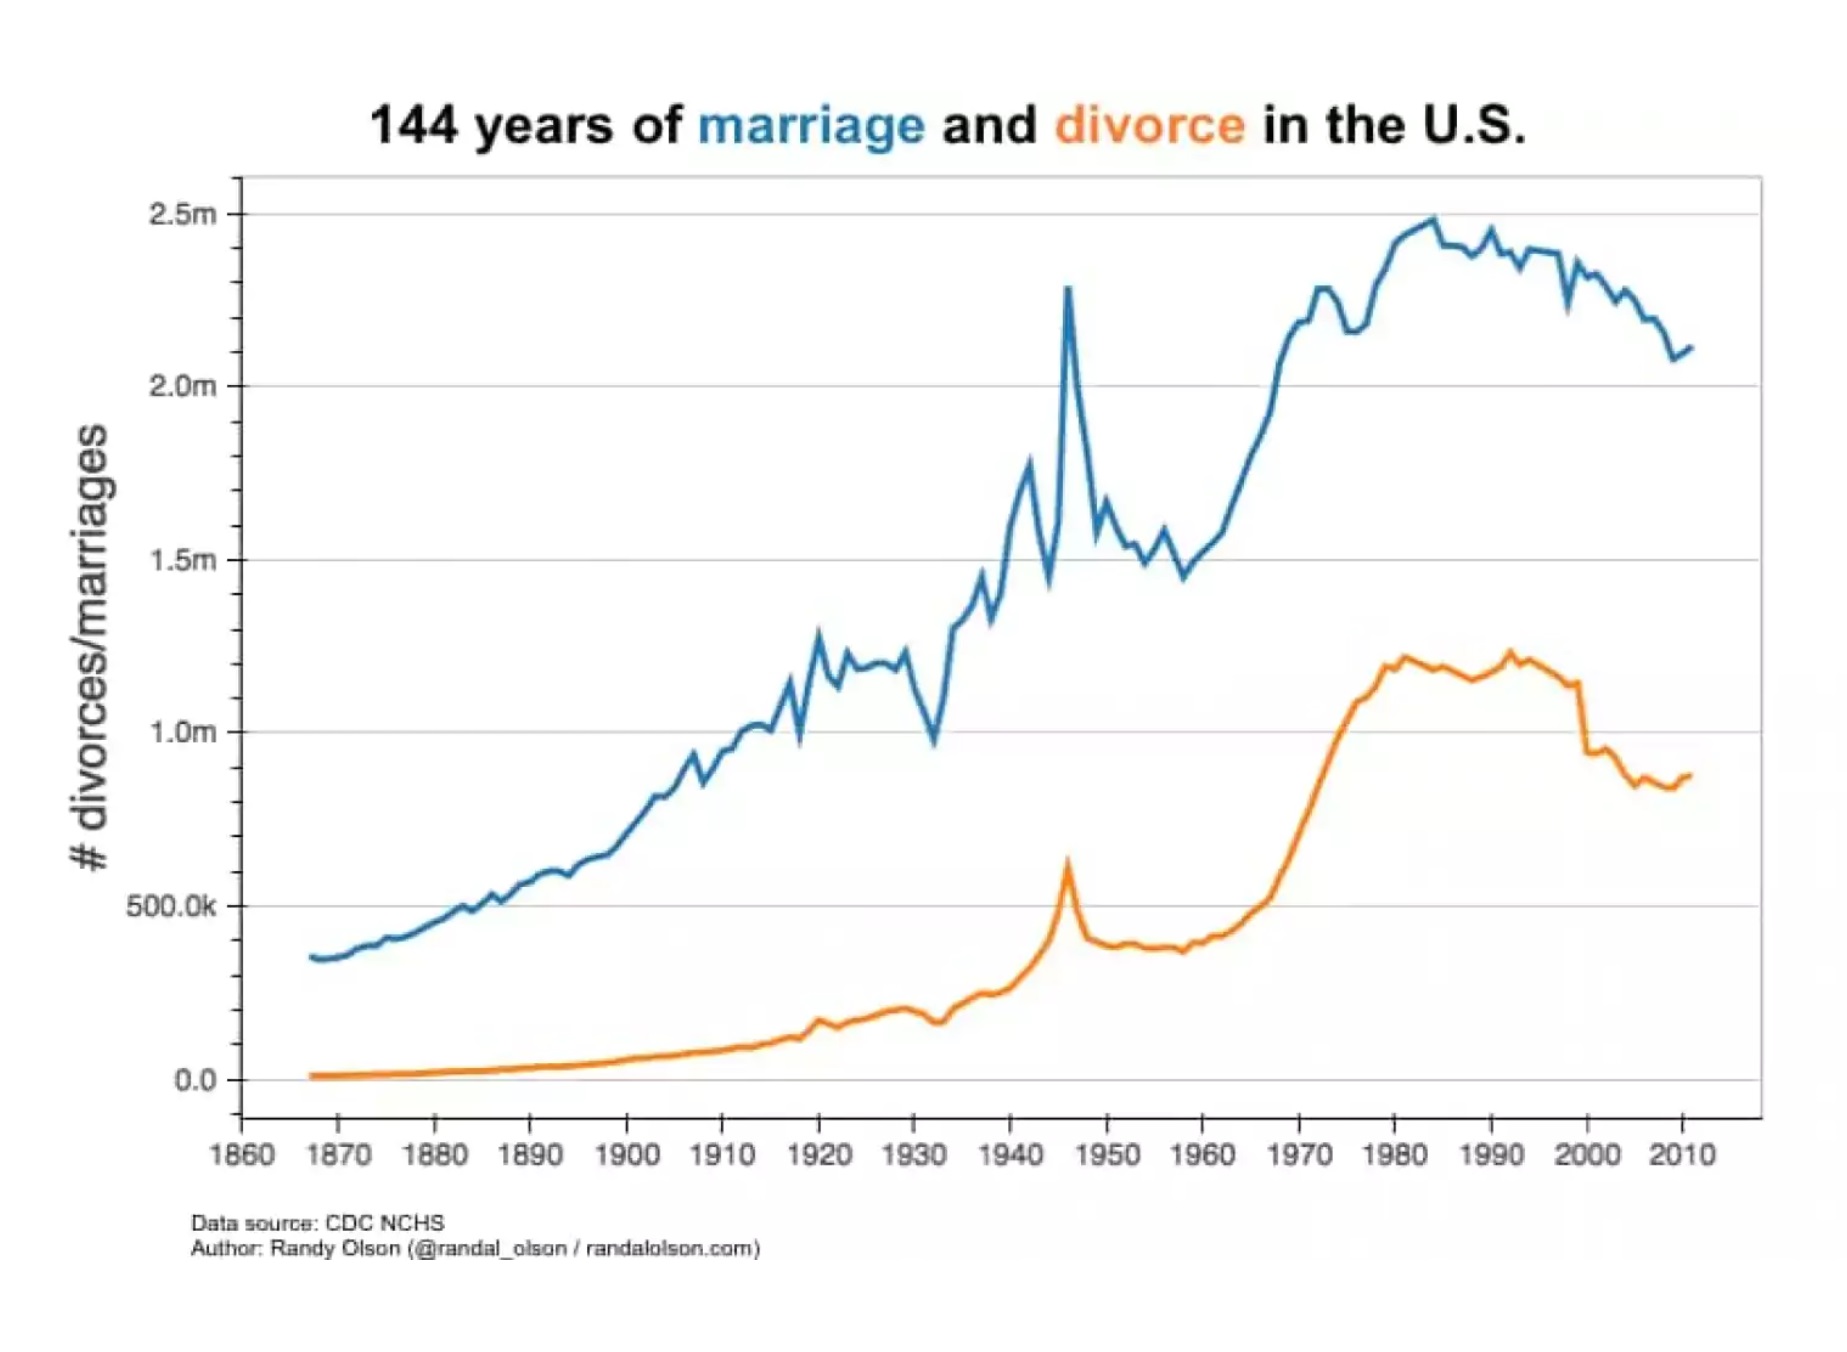 Divorce rate for interracial marriage